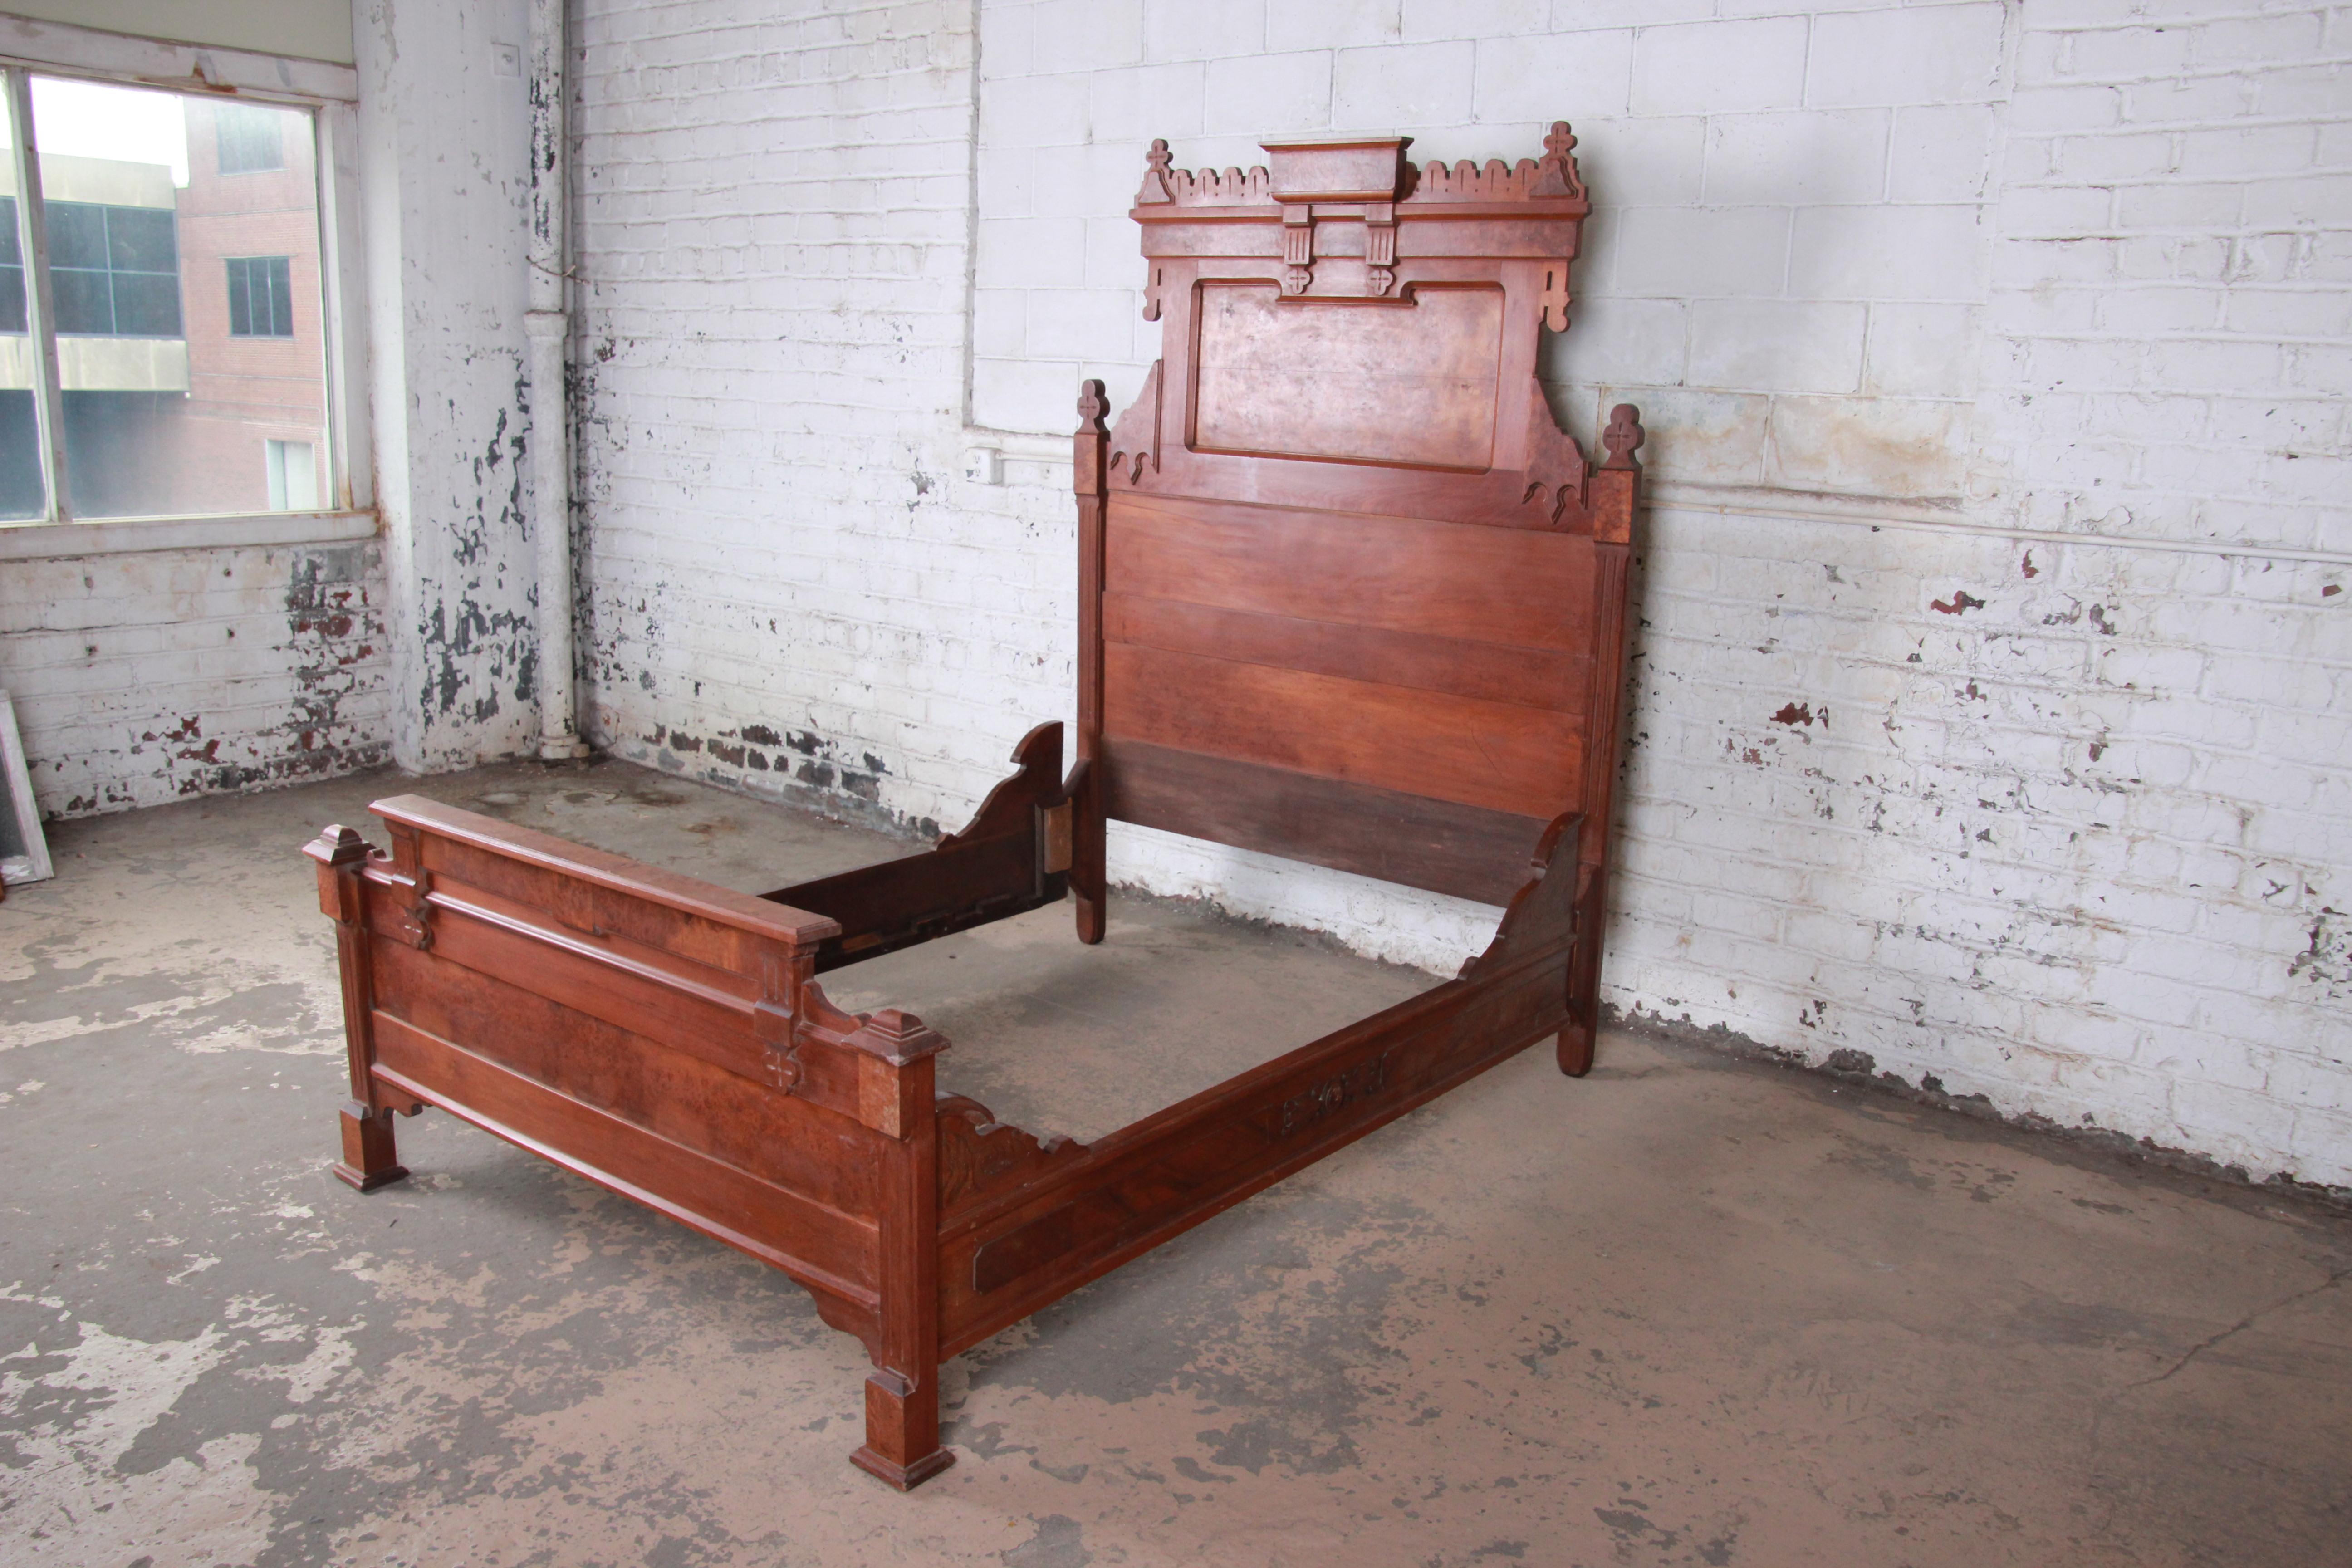 A gorgeous Victorian Eastlake carved walnut and burl wood full size bed frame

USA, circa 1880s

Measures: 59.63